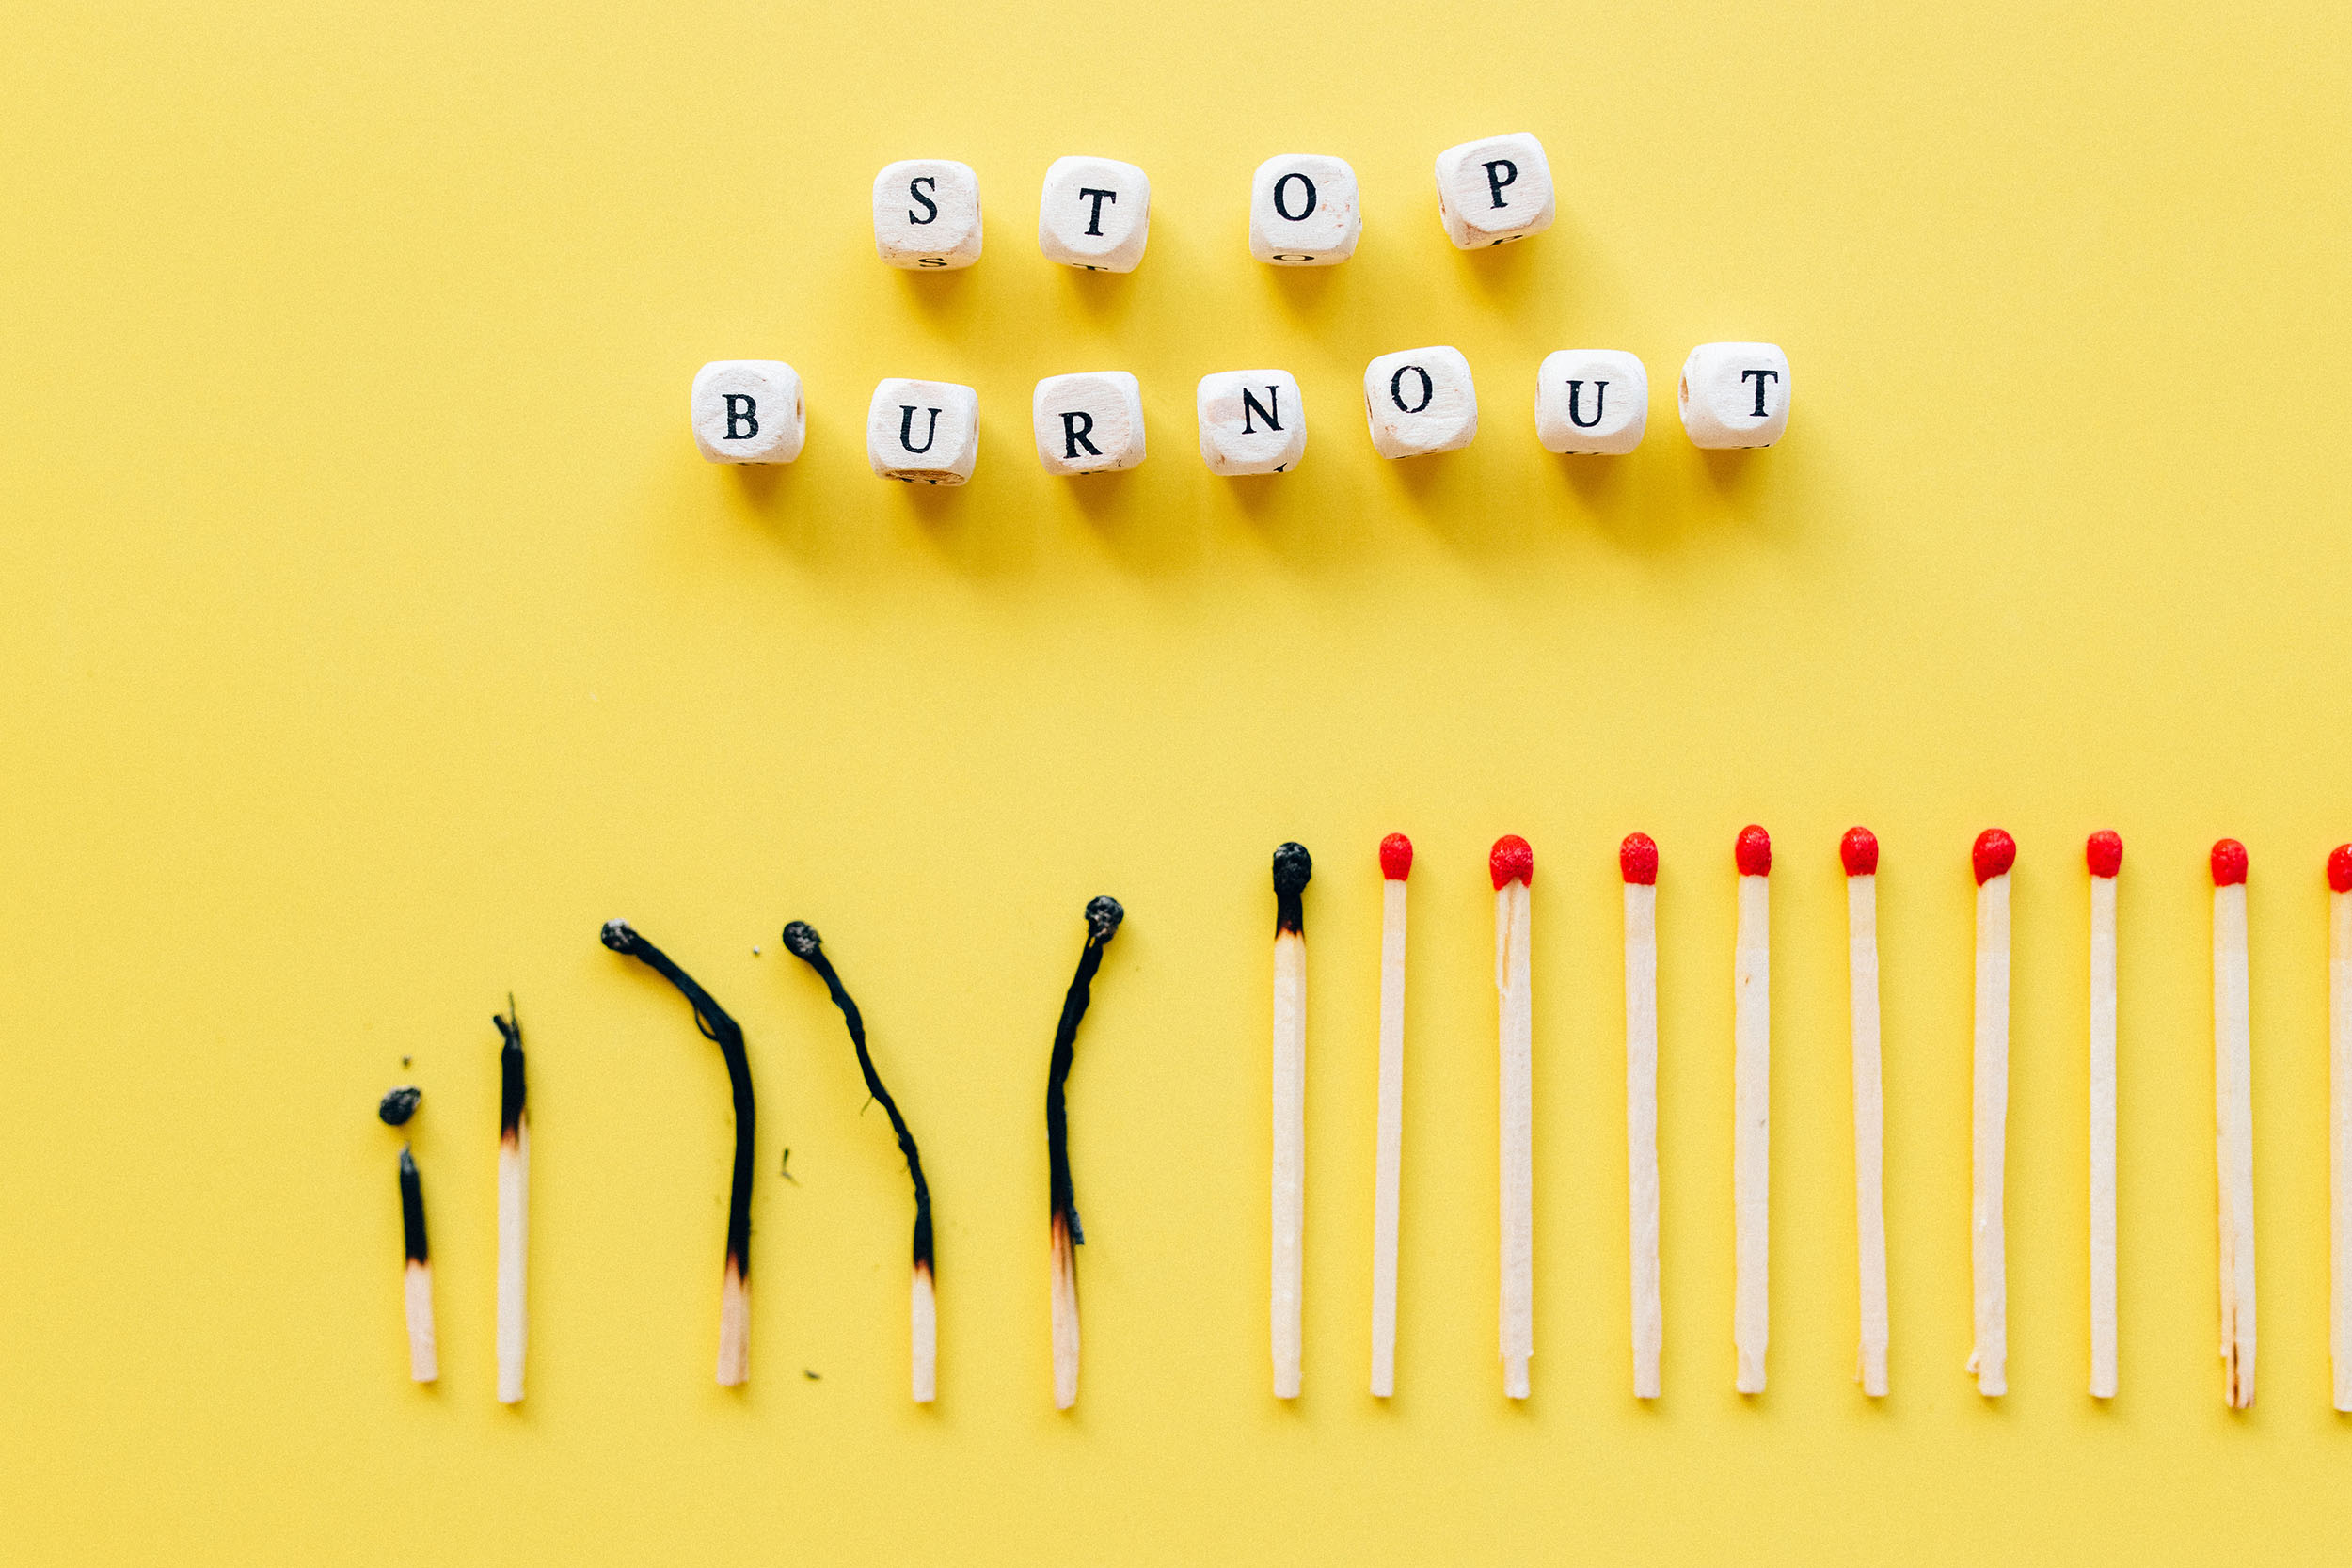 What mistakes might you be making with work burnout?